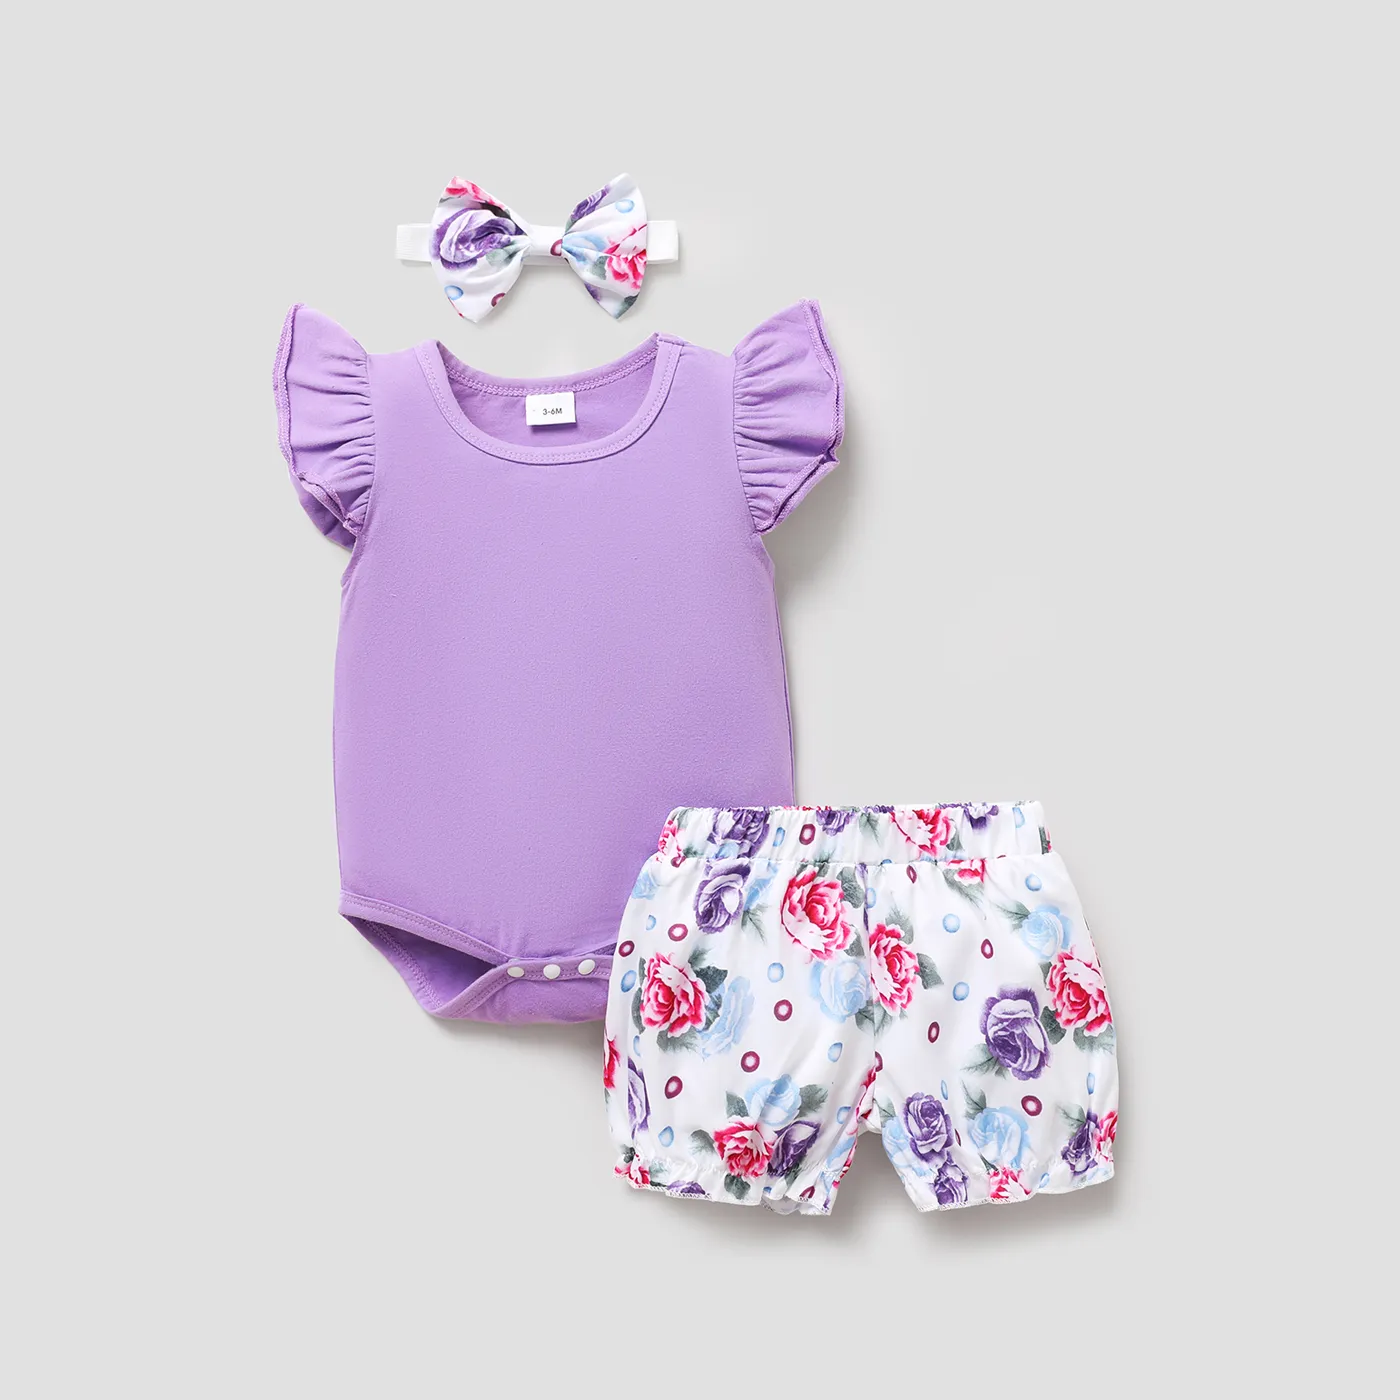 3pcs Baby Girl 95% Cotton Layered Ruffle Sleeve Romper with Floral Print Bloomers Shorts and Headban